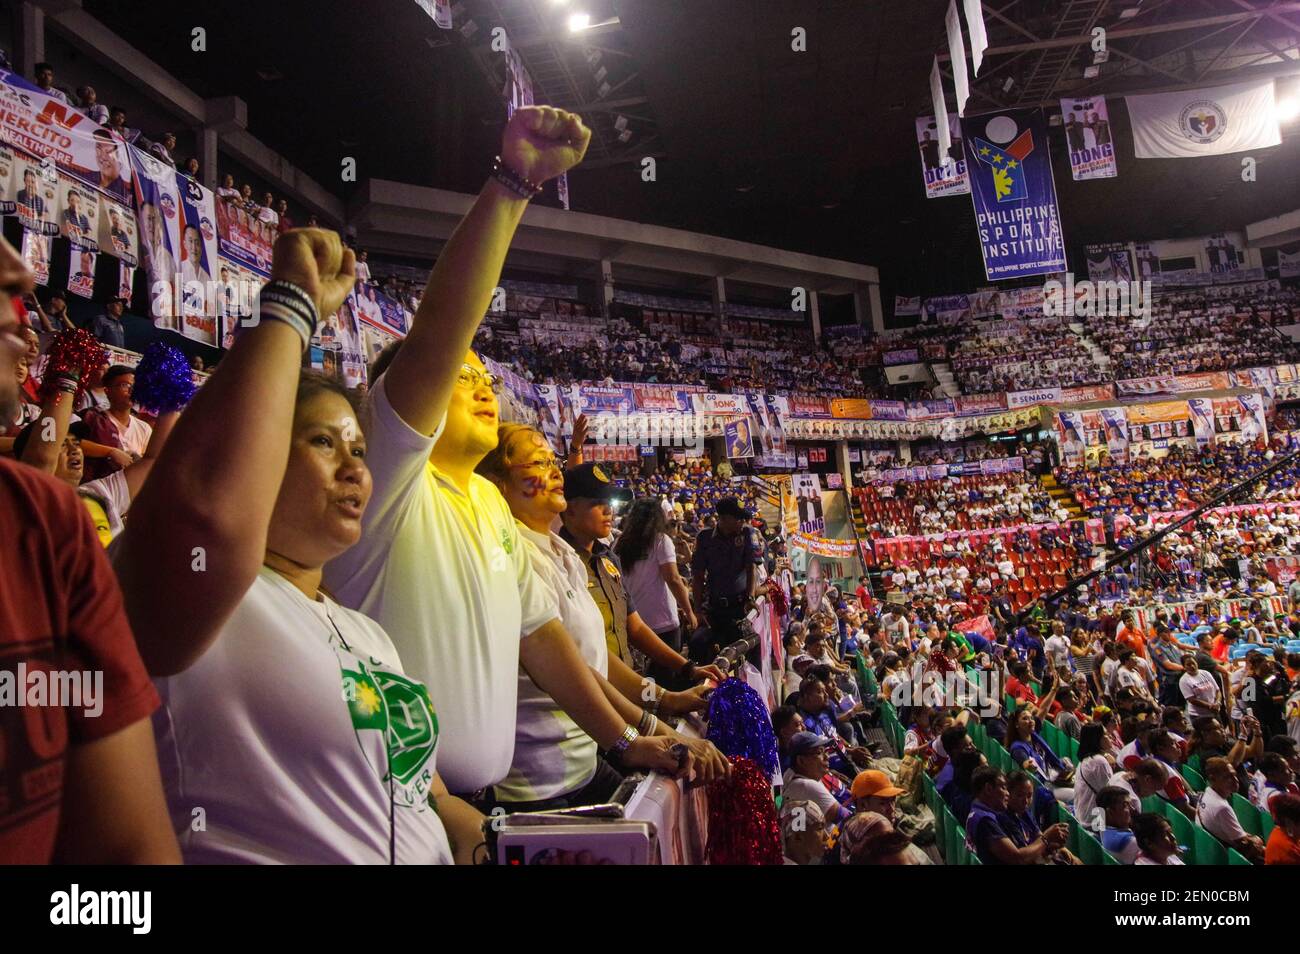 PDP-Laban and Hugpong ng Pagbabago supporters raise fists during PDP-Laban's Campaign Rally at Philsports Complex in Pasig City on Saturday, 11 May 2019.) Stock Photo